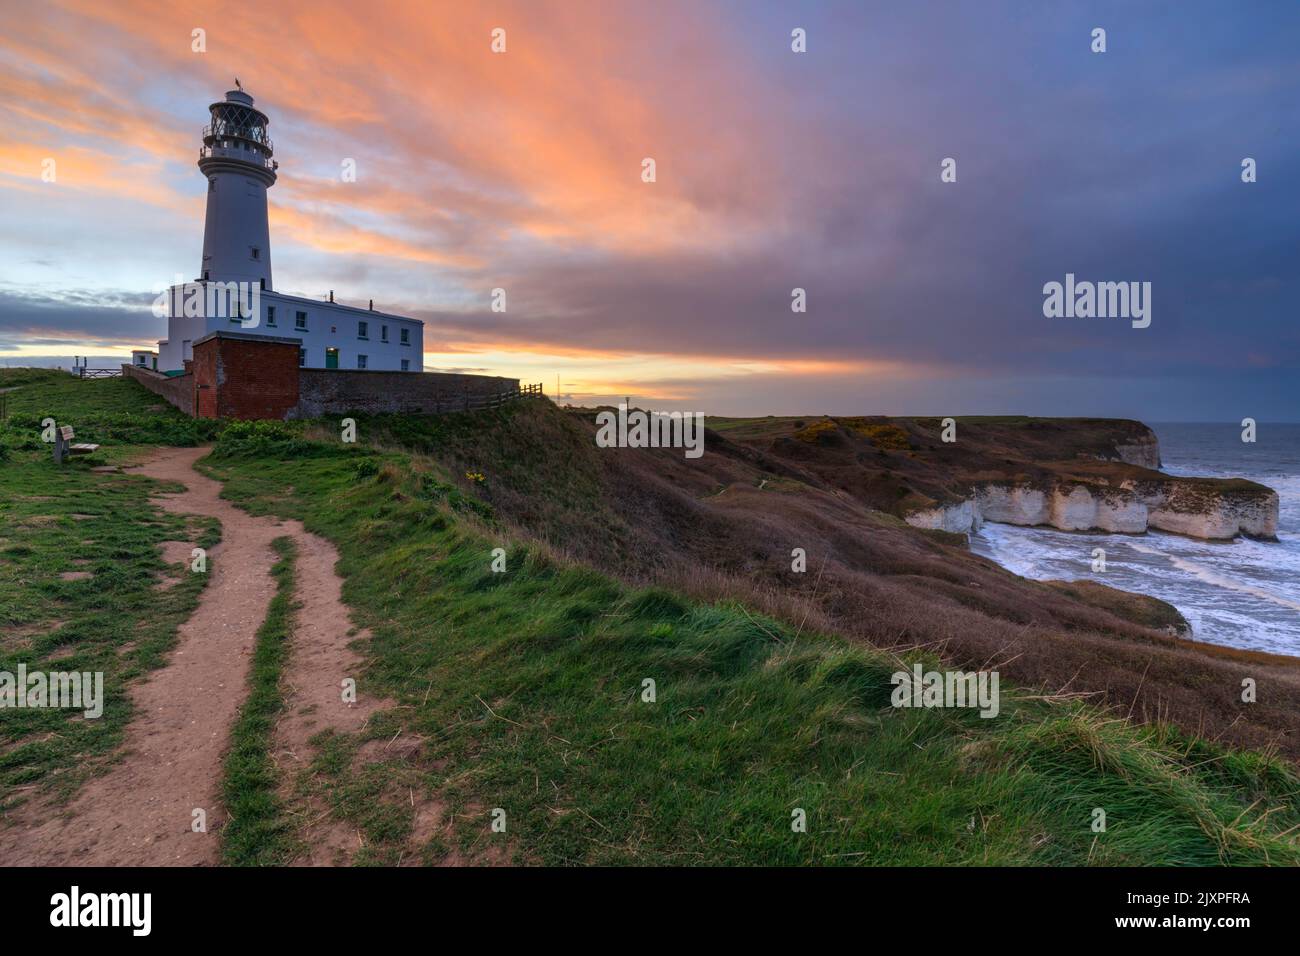 Flamborough Head Lighthouse in Yorkshire captured at sunset. Stock Photo